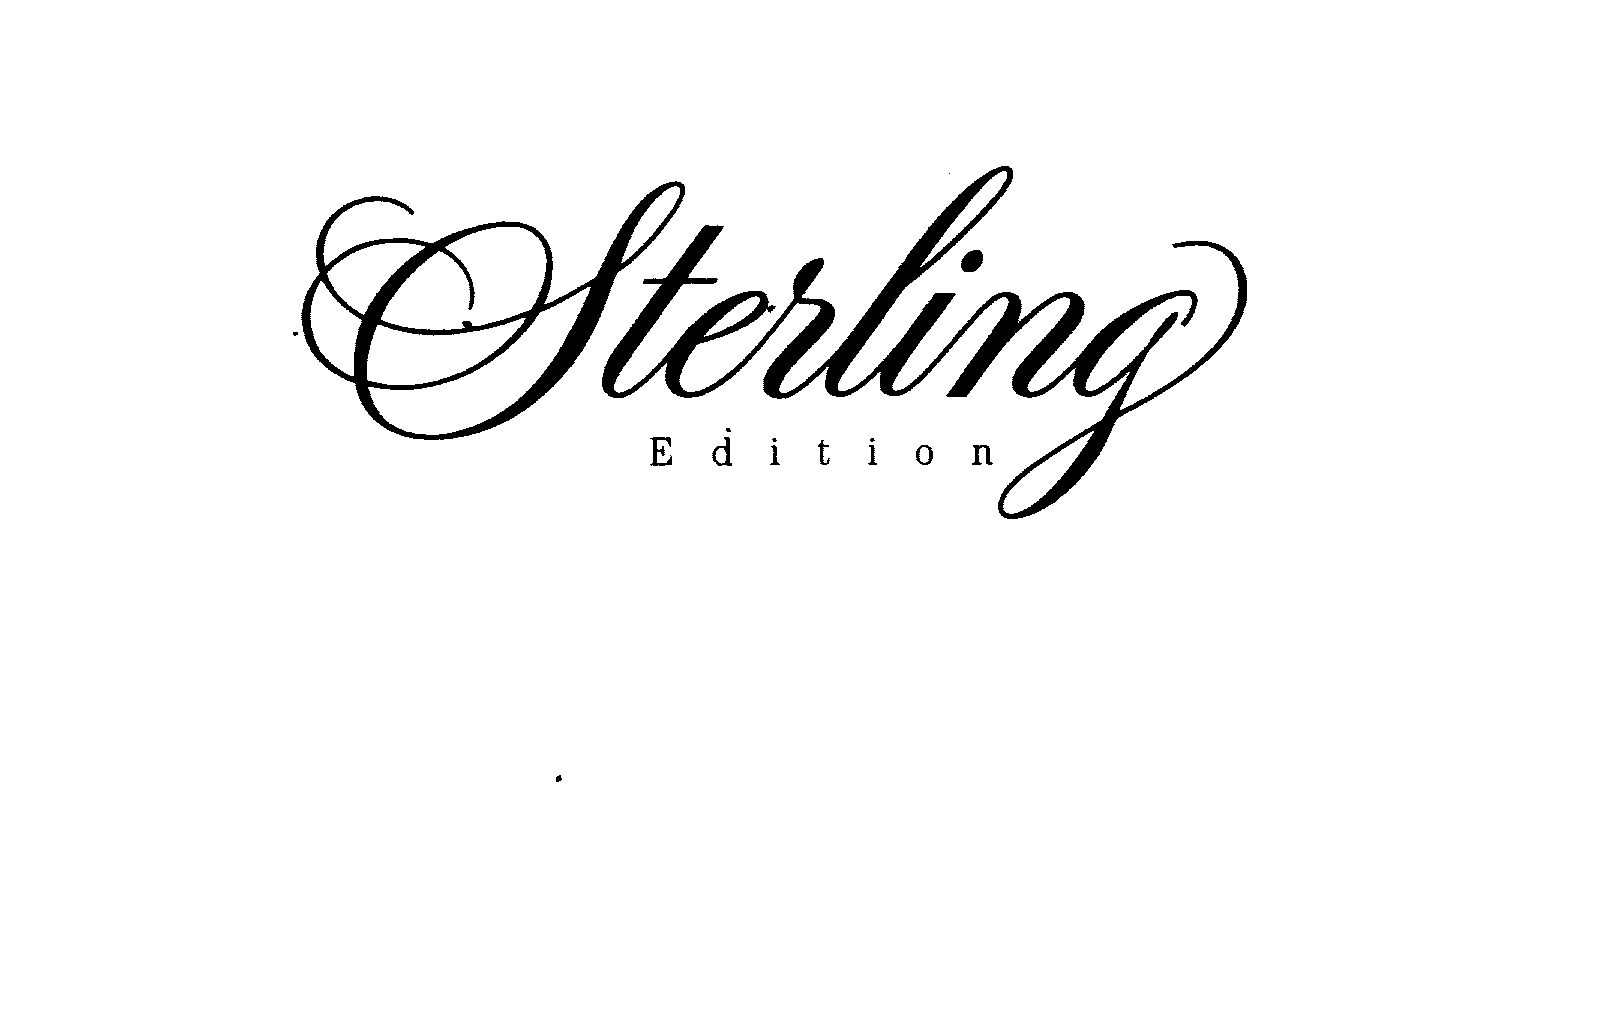  STERLING EDITION